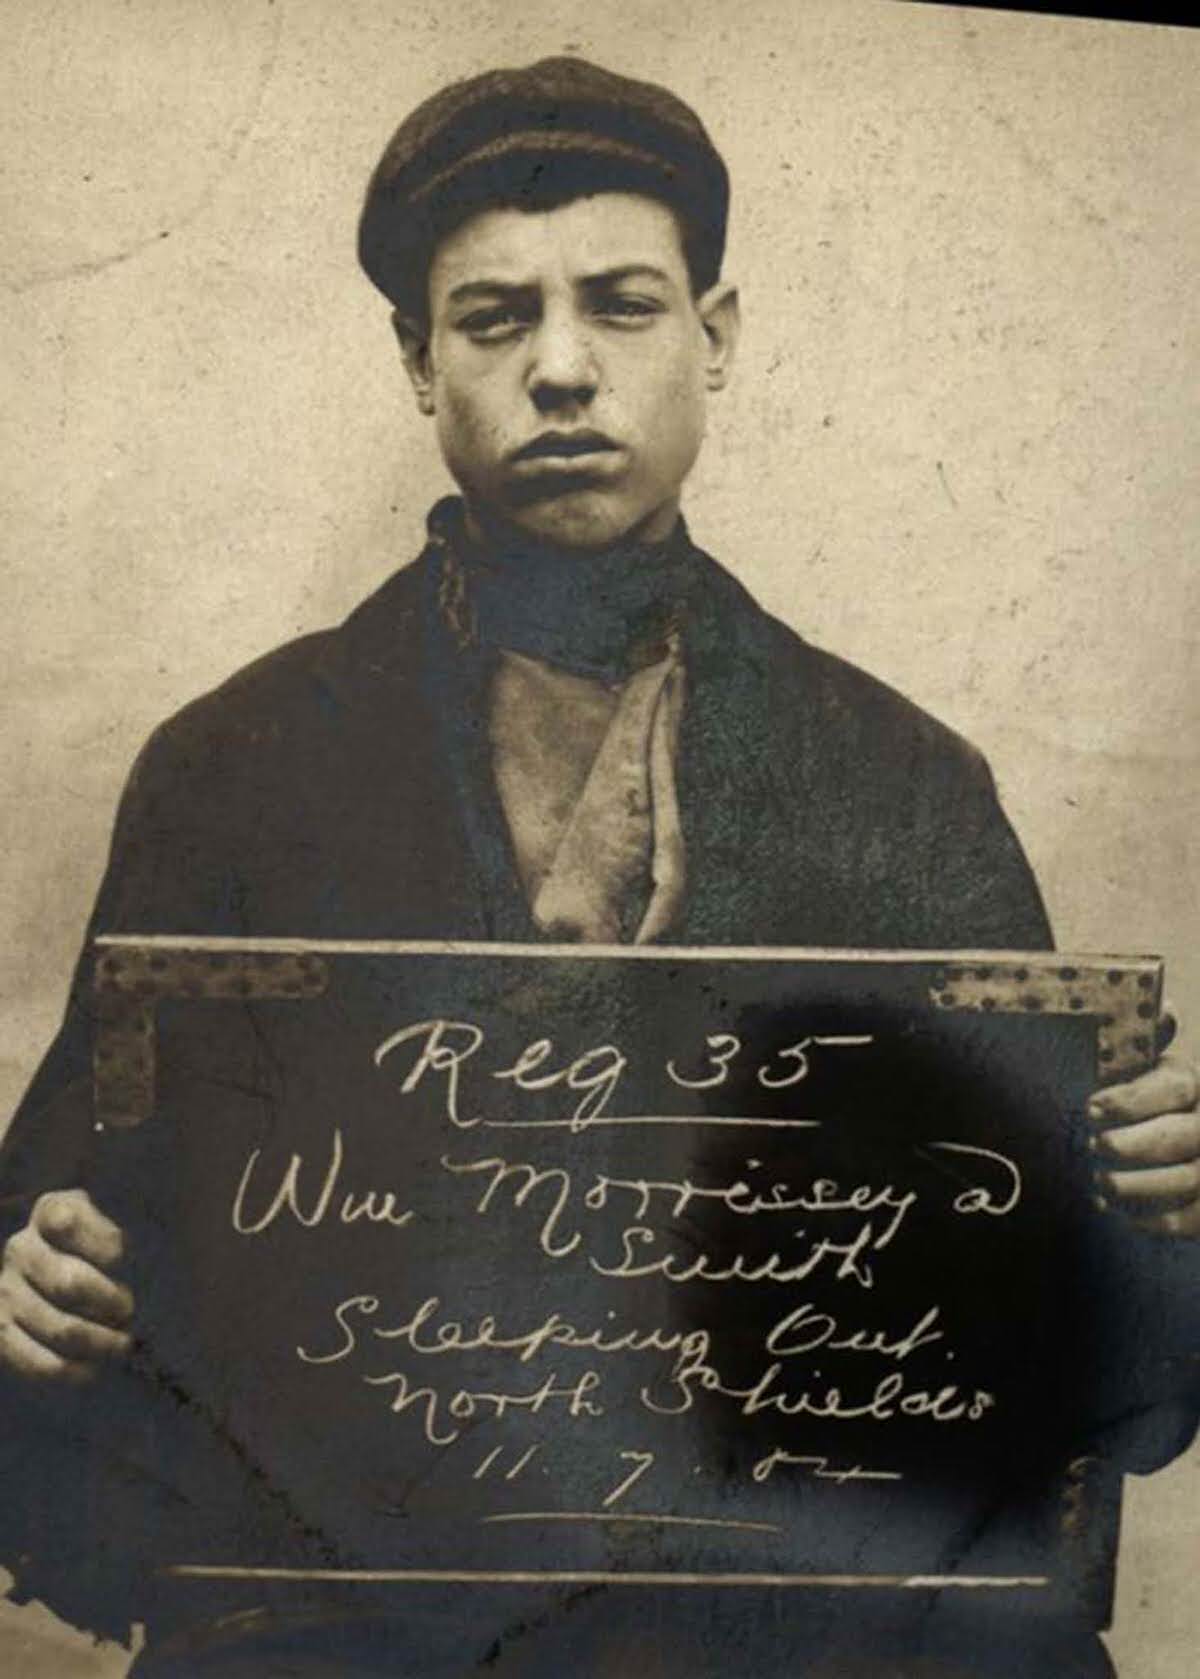 William Morrissey, age unknown, arrested for sleeping outdoors, 1904.